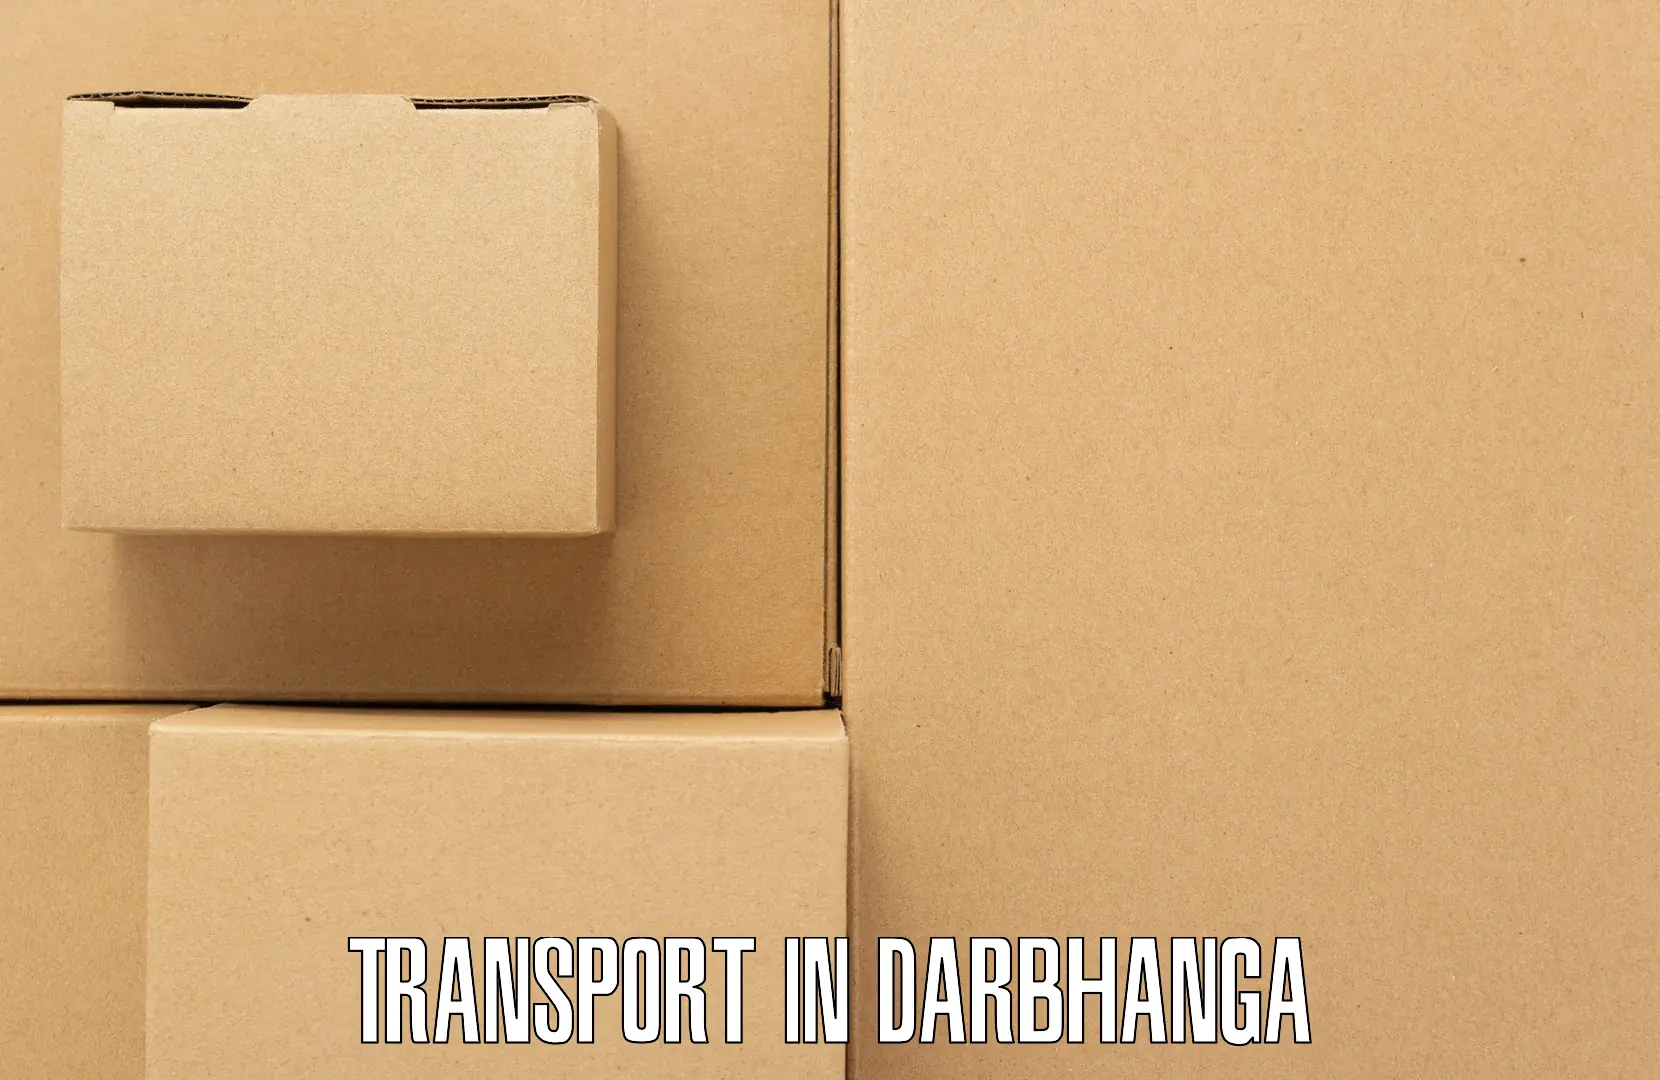 Air freight transport services in Darbhanga